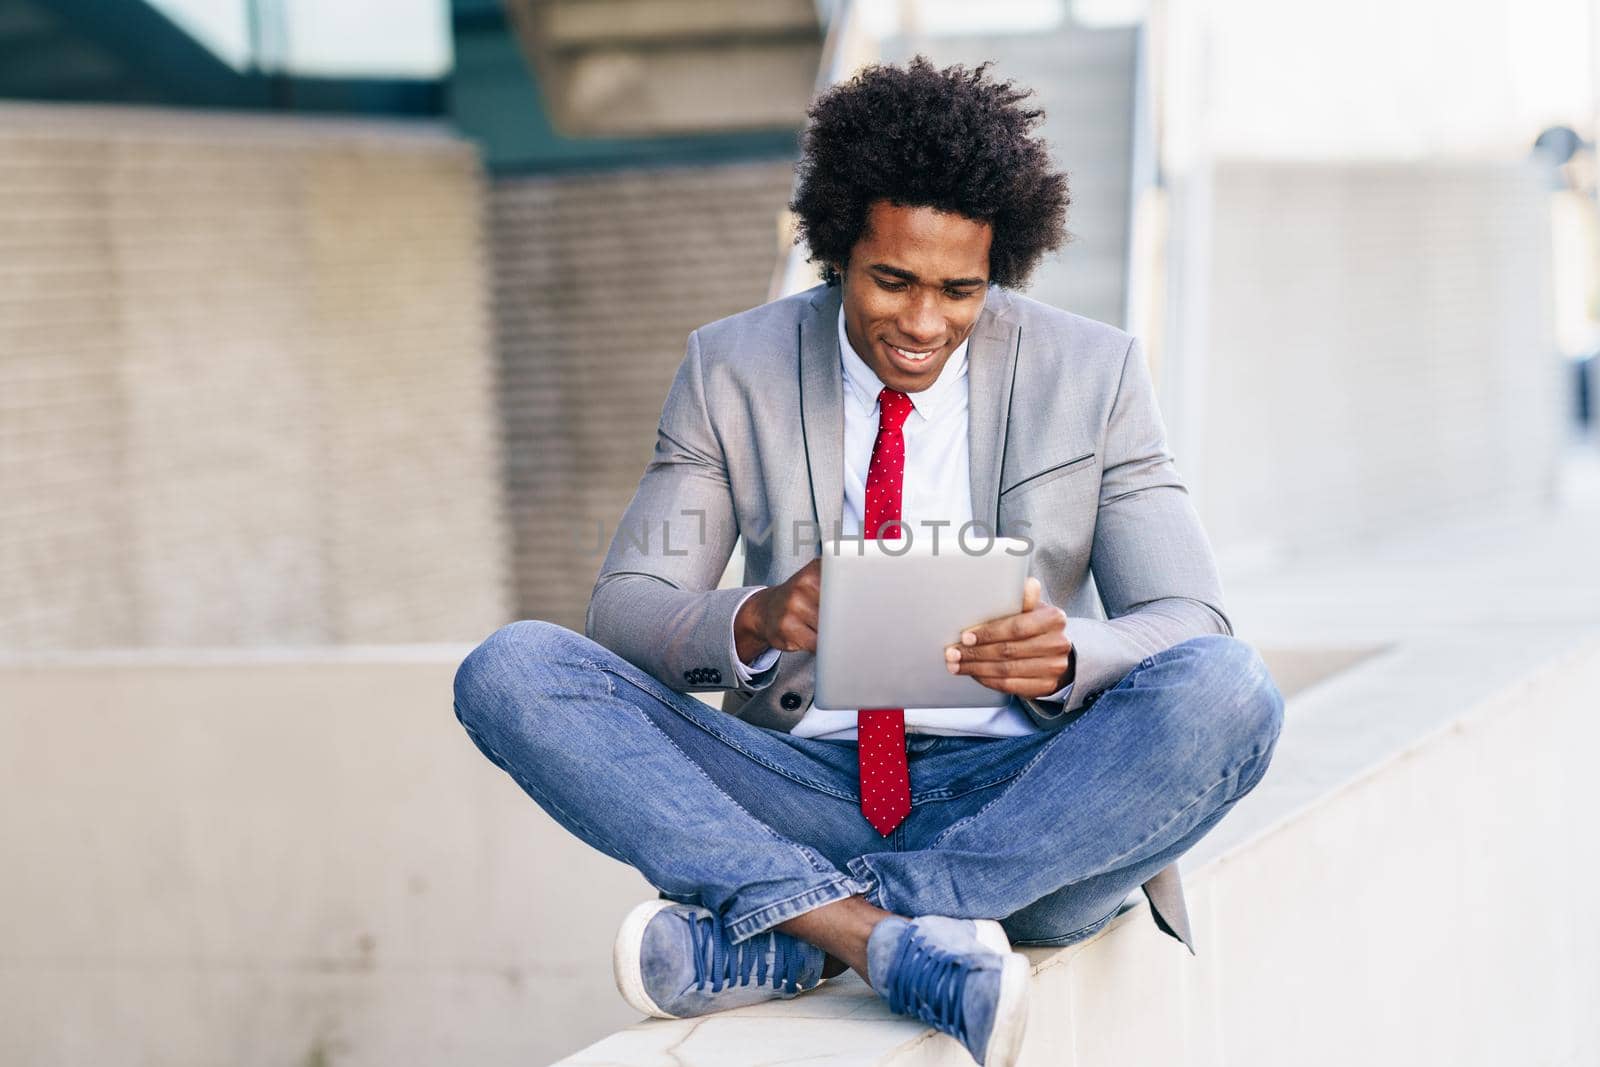 Black Businessman using a digital tablet sitting near an office building. by javiindy